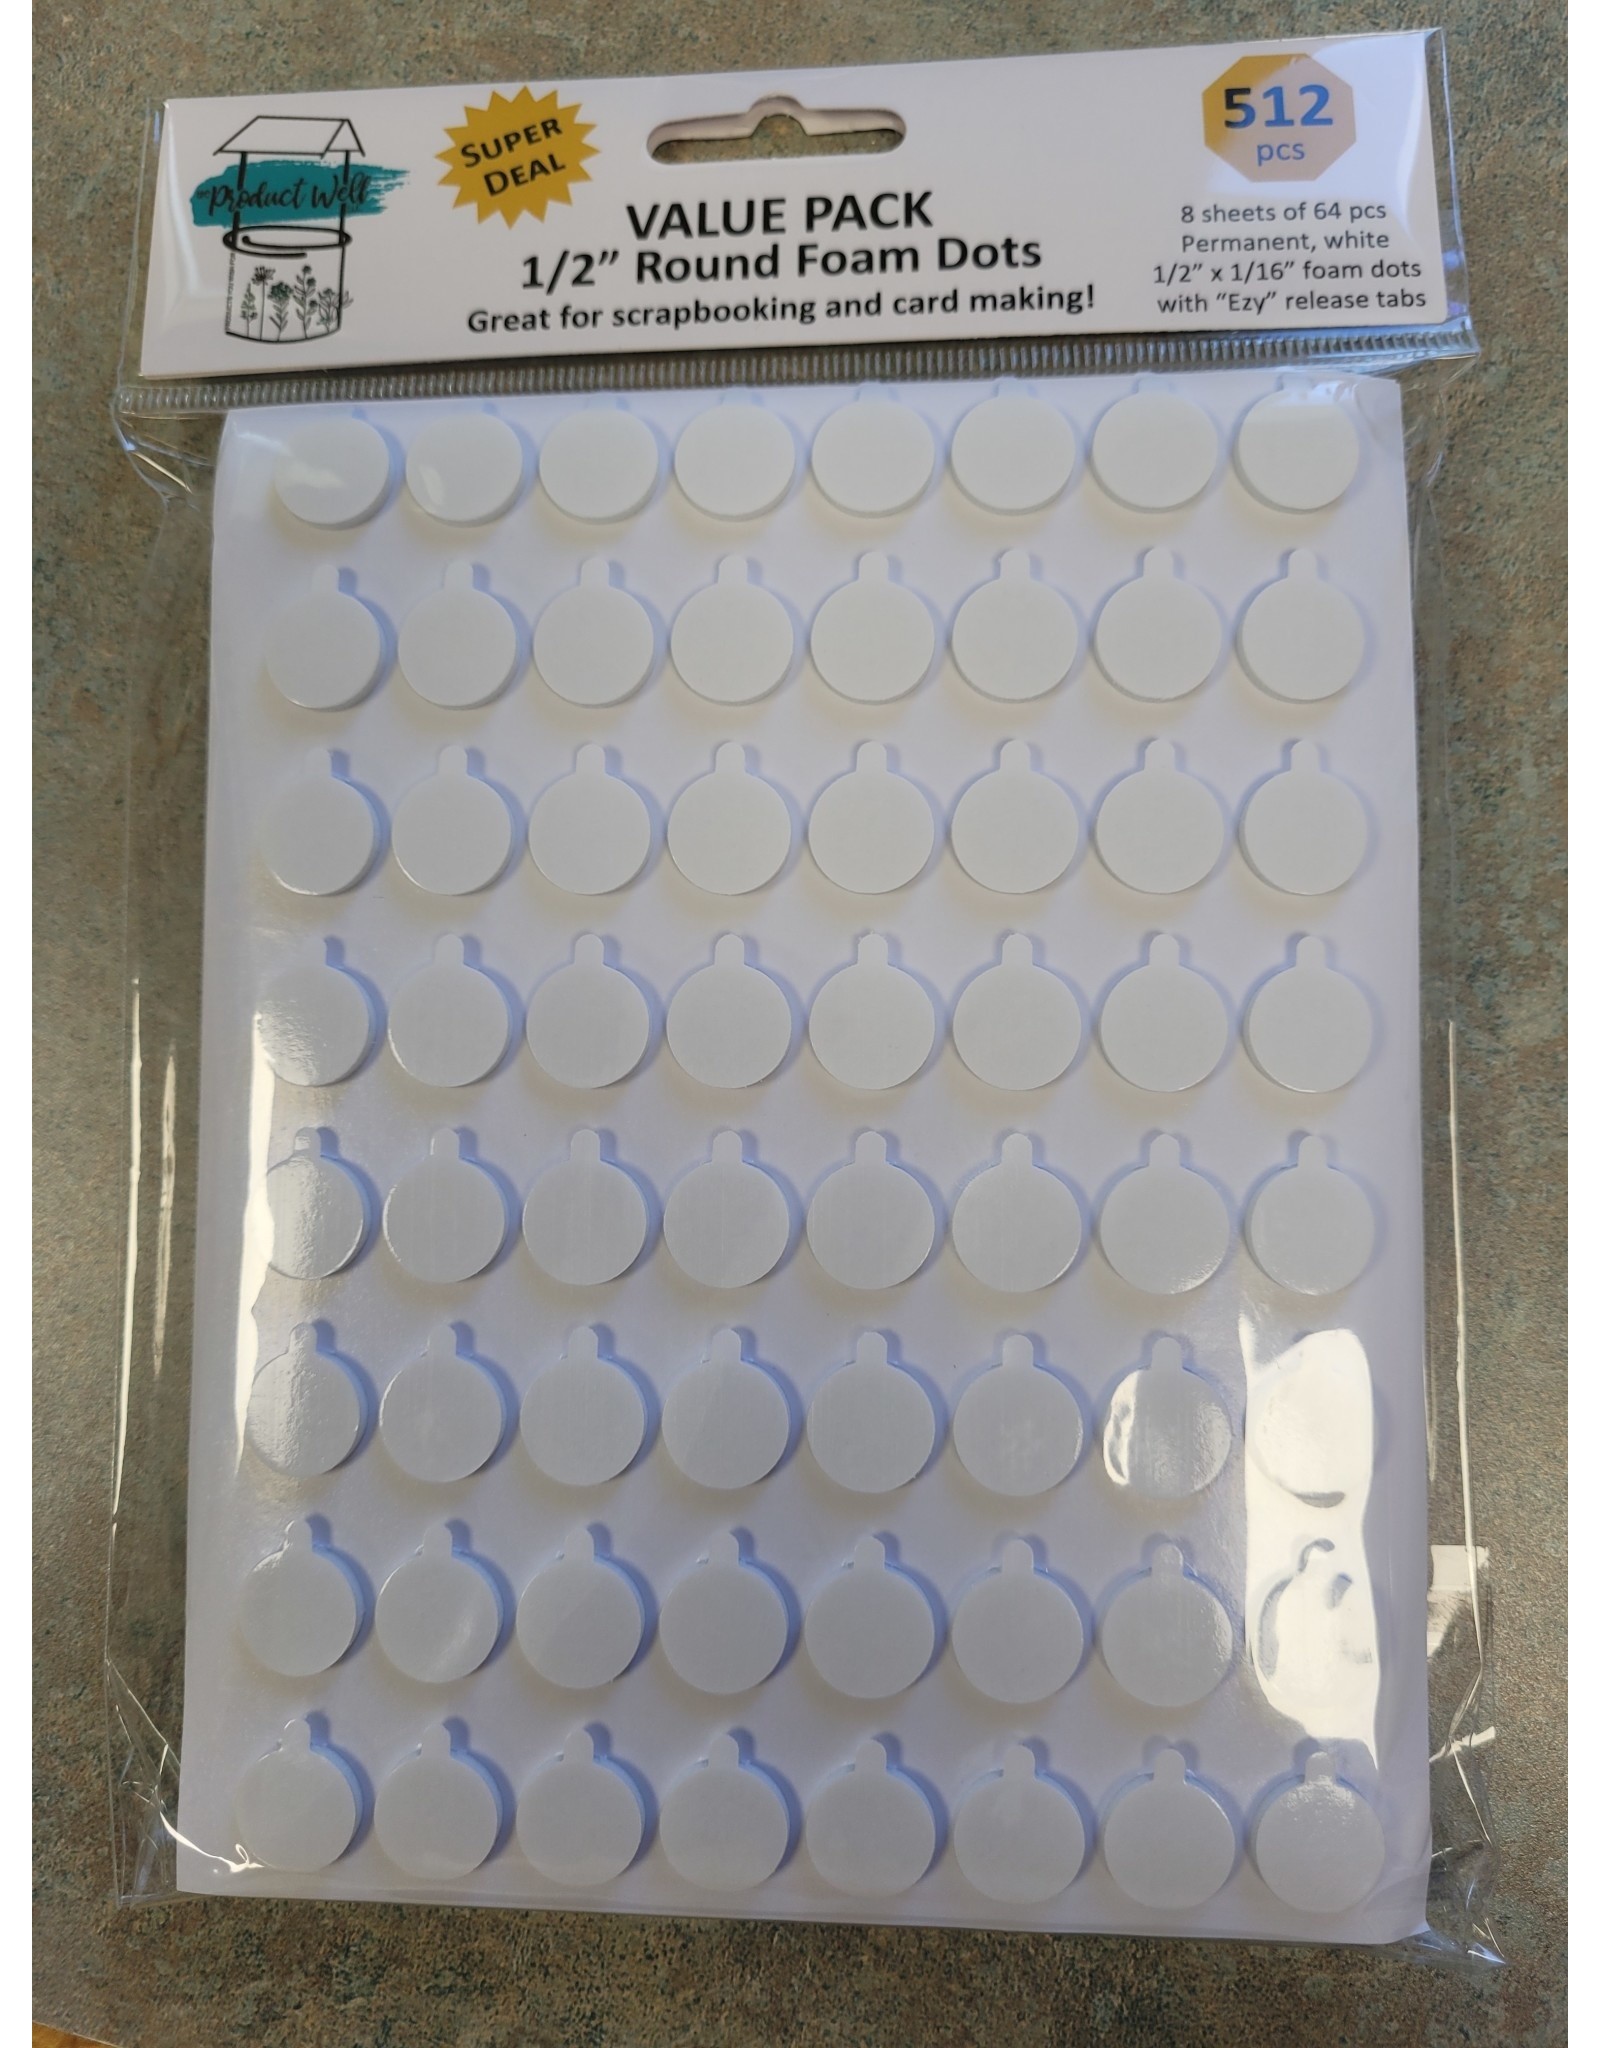 THE PRODUCT WELL 1/2" Round Foam Dots 512 pcs